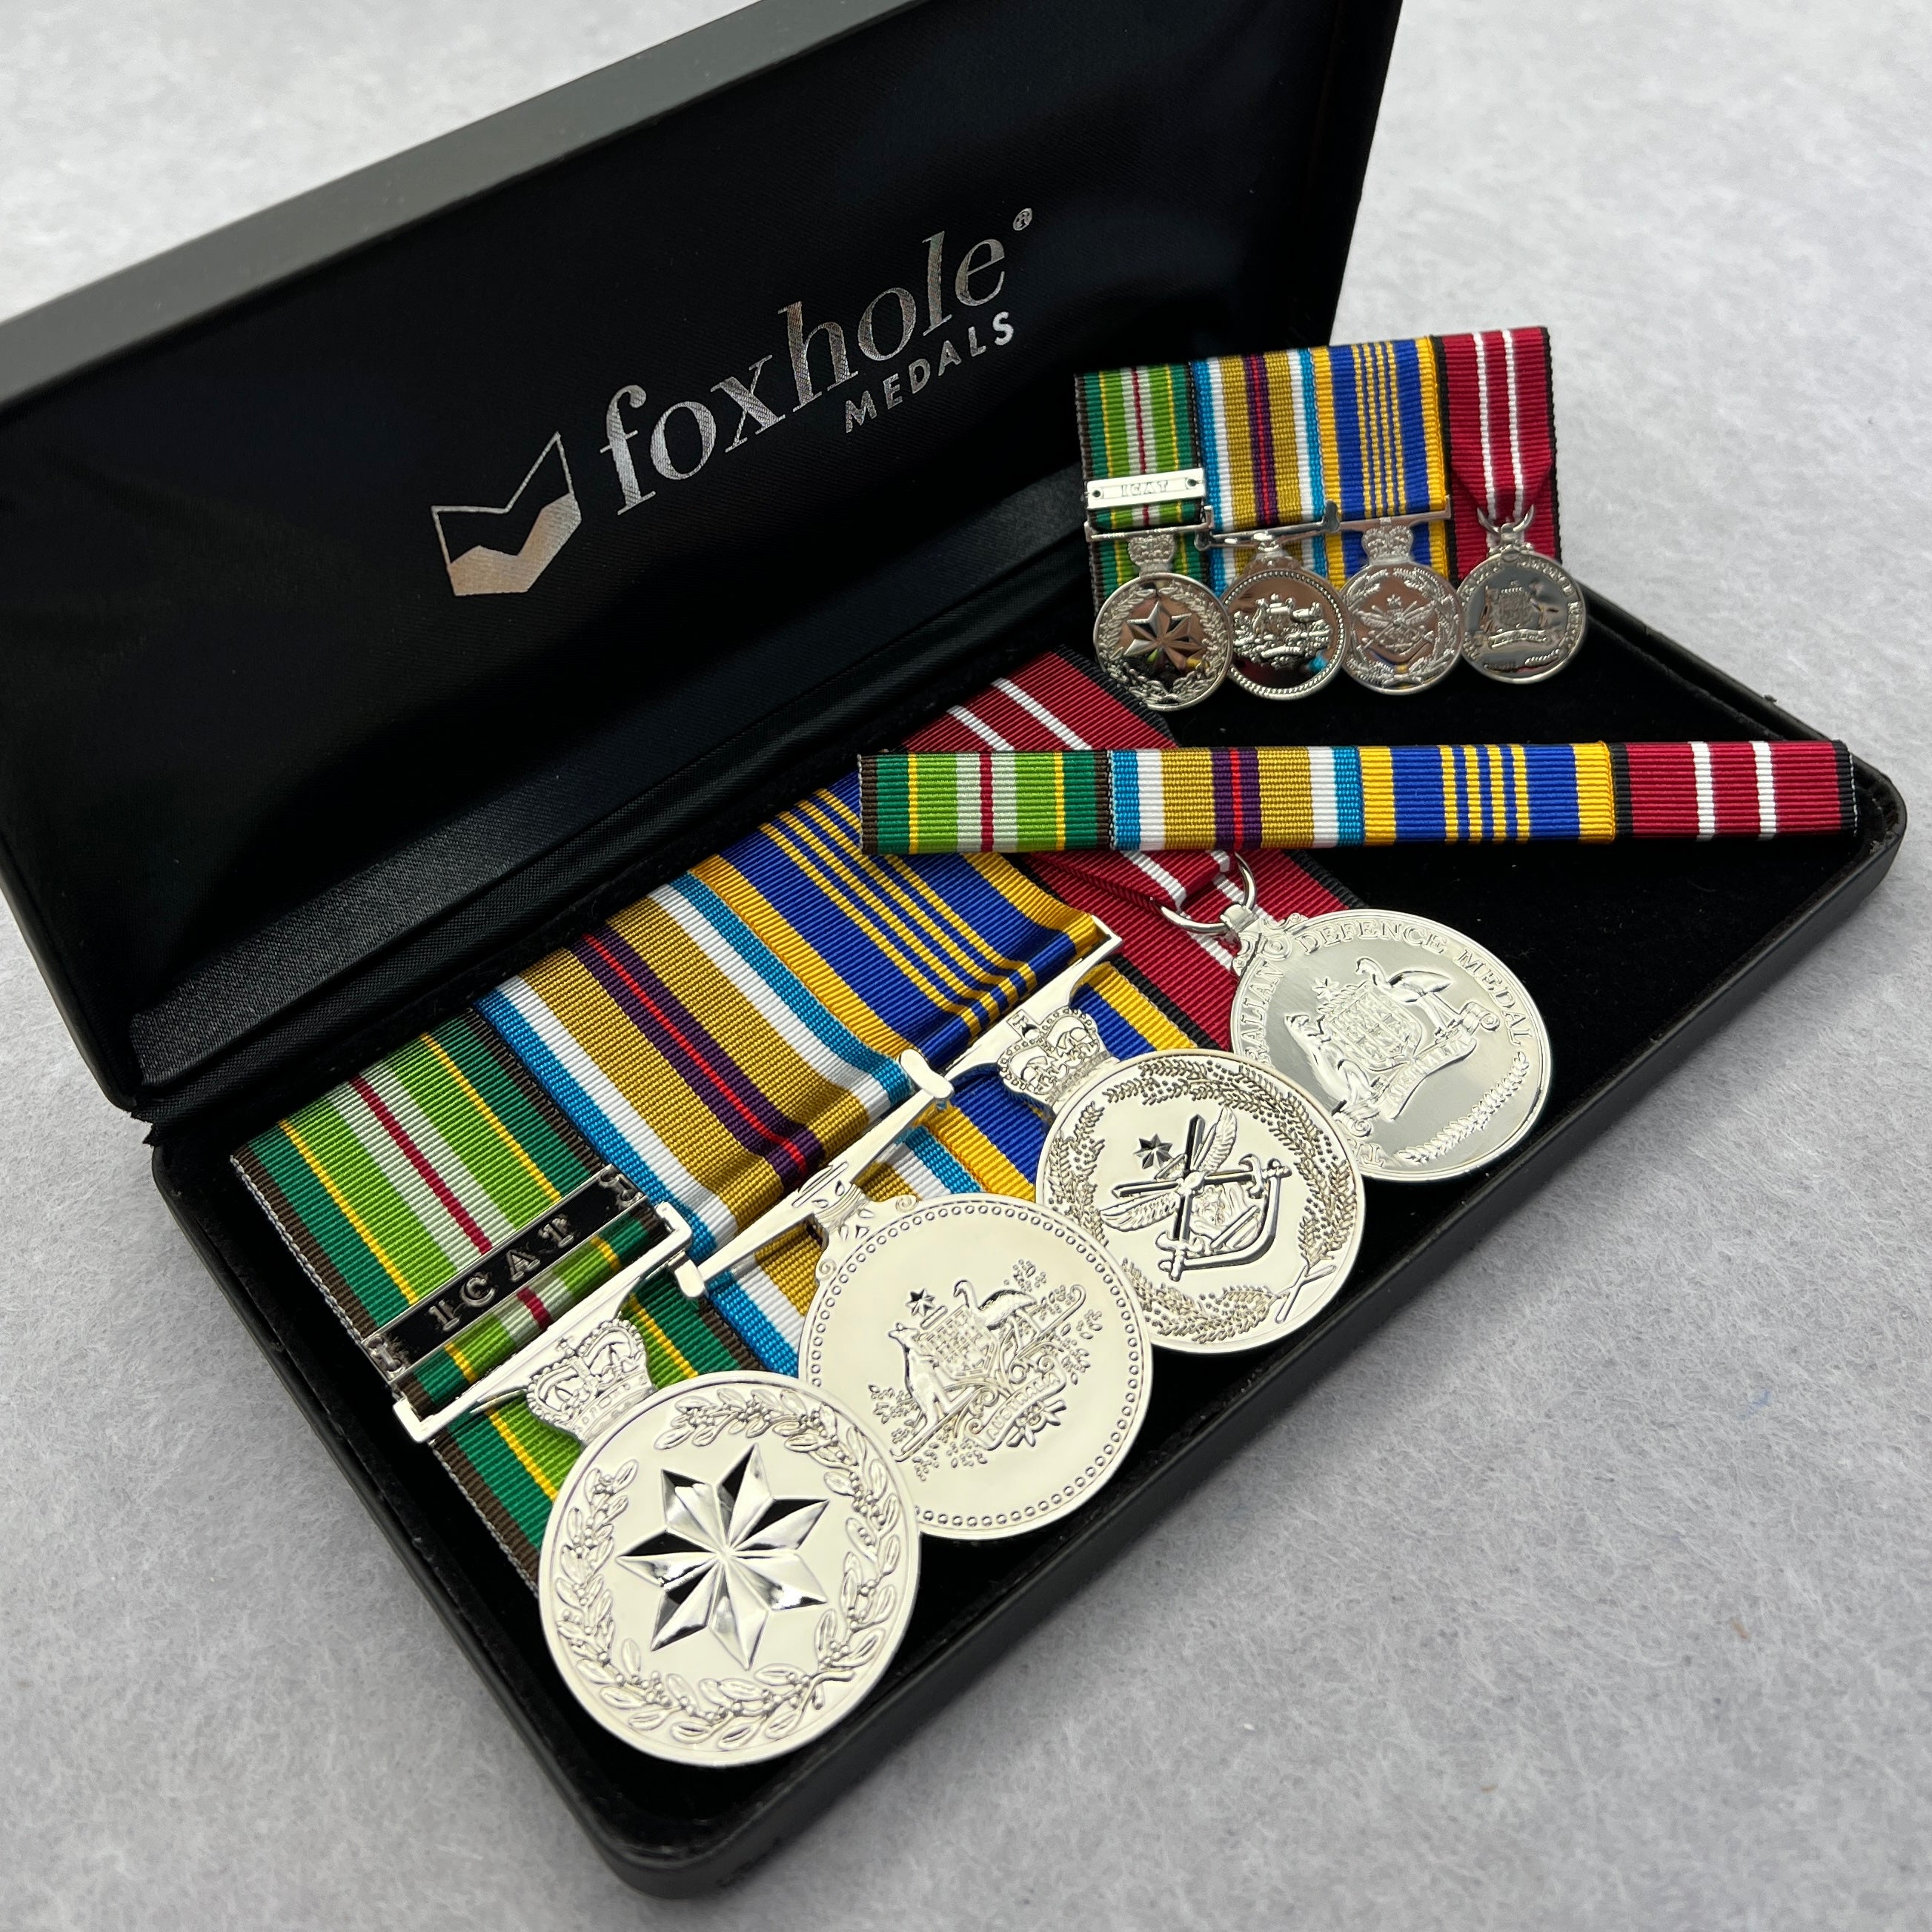 AASM-ICAT / Afghanistan Long Service Group - Foxhole Medals